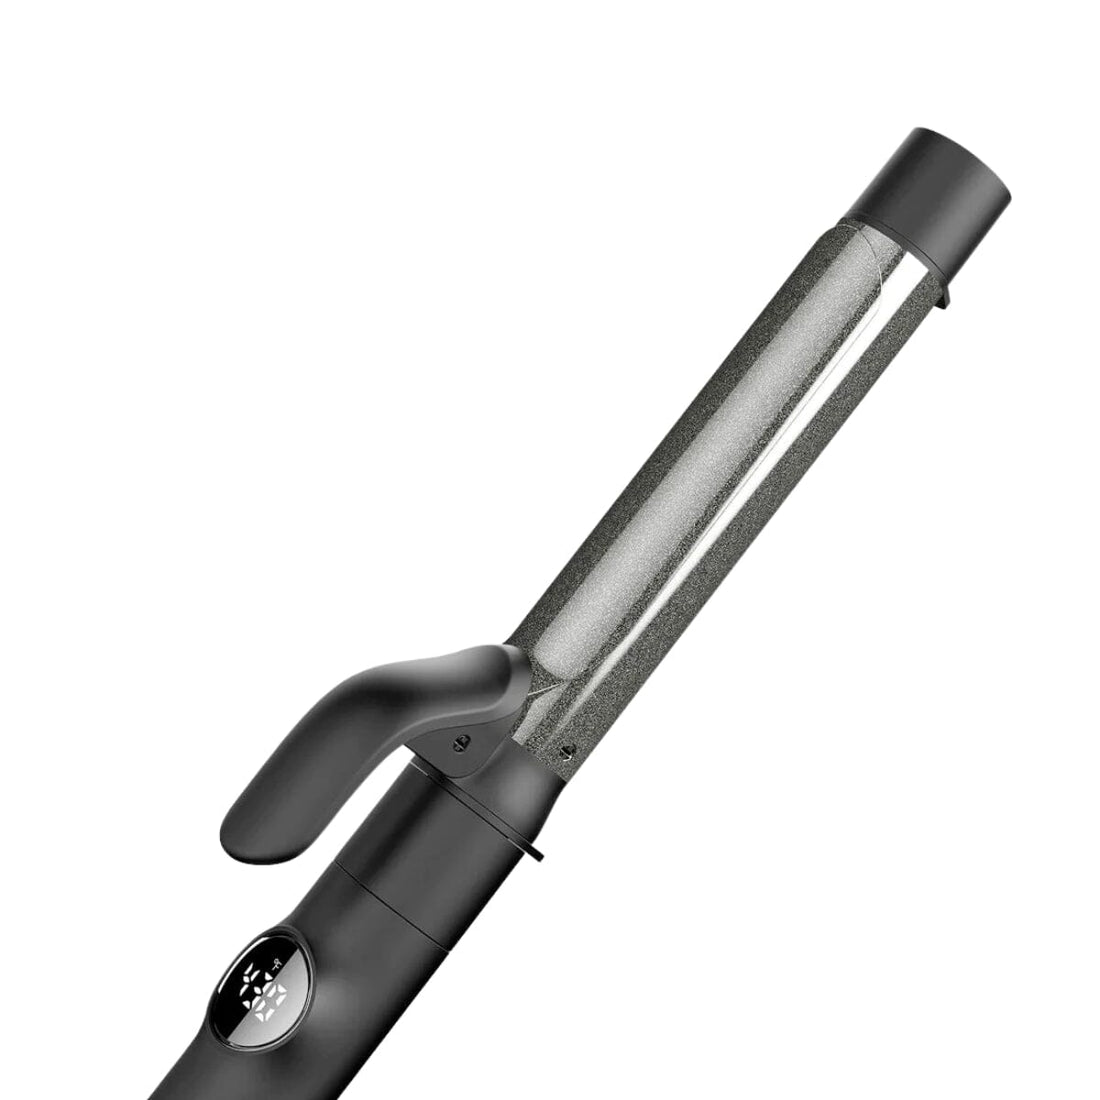 HairMNL TYMO Cues 3-in-1 Interchangeable Curling Iron Black HC-502